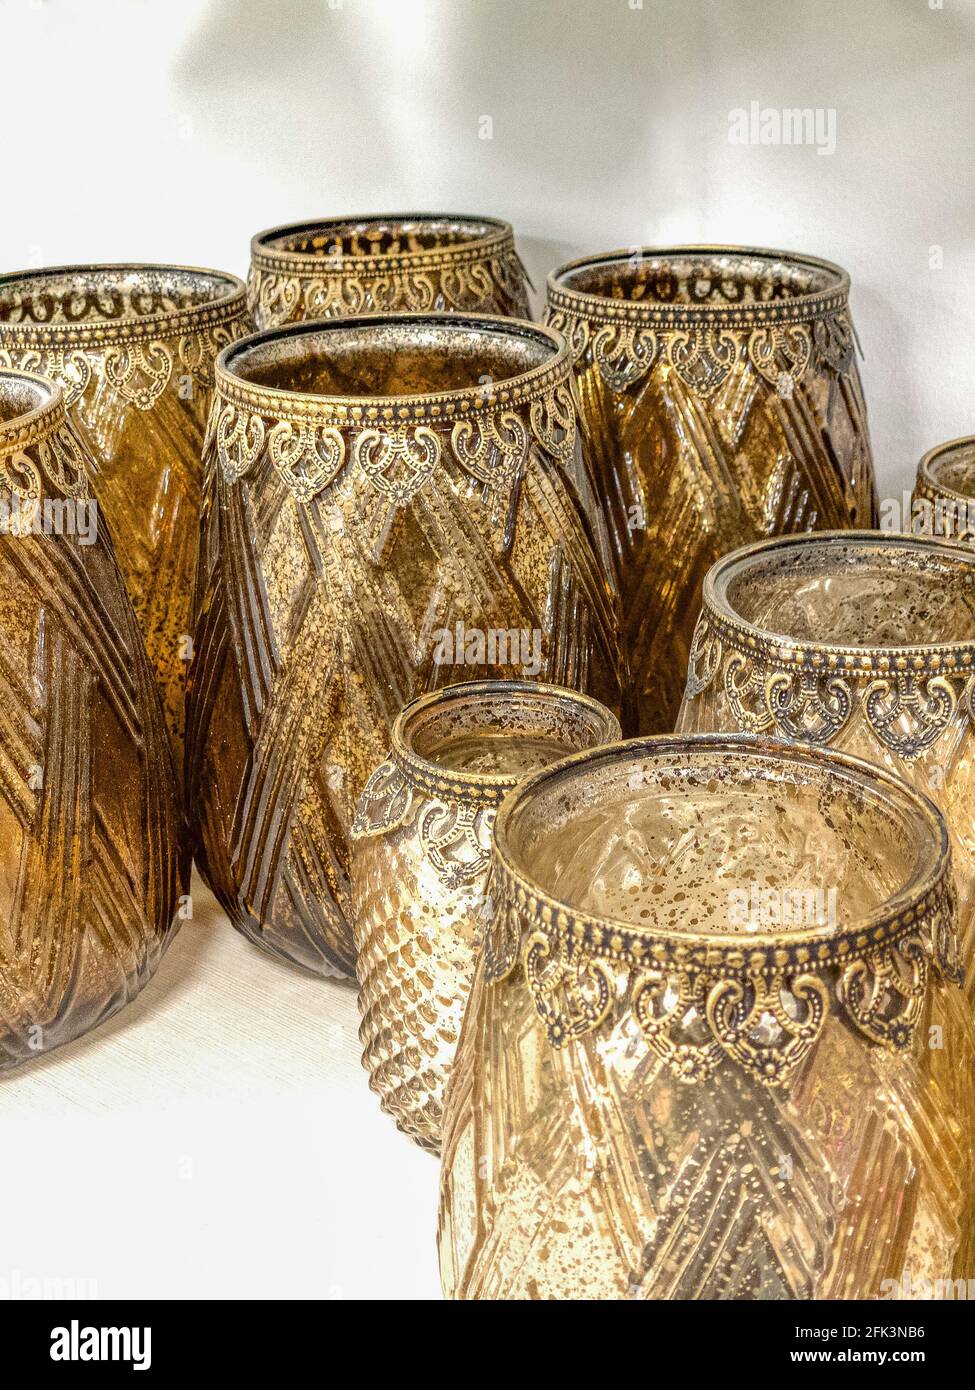 Collection of antique golden vases against a white background Stock Photo